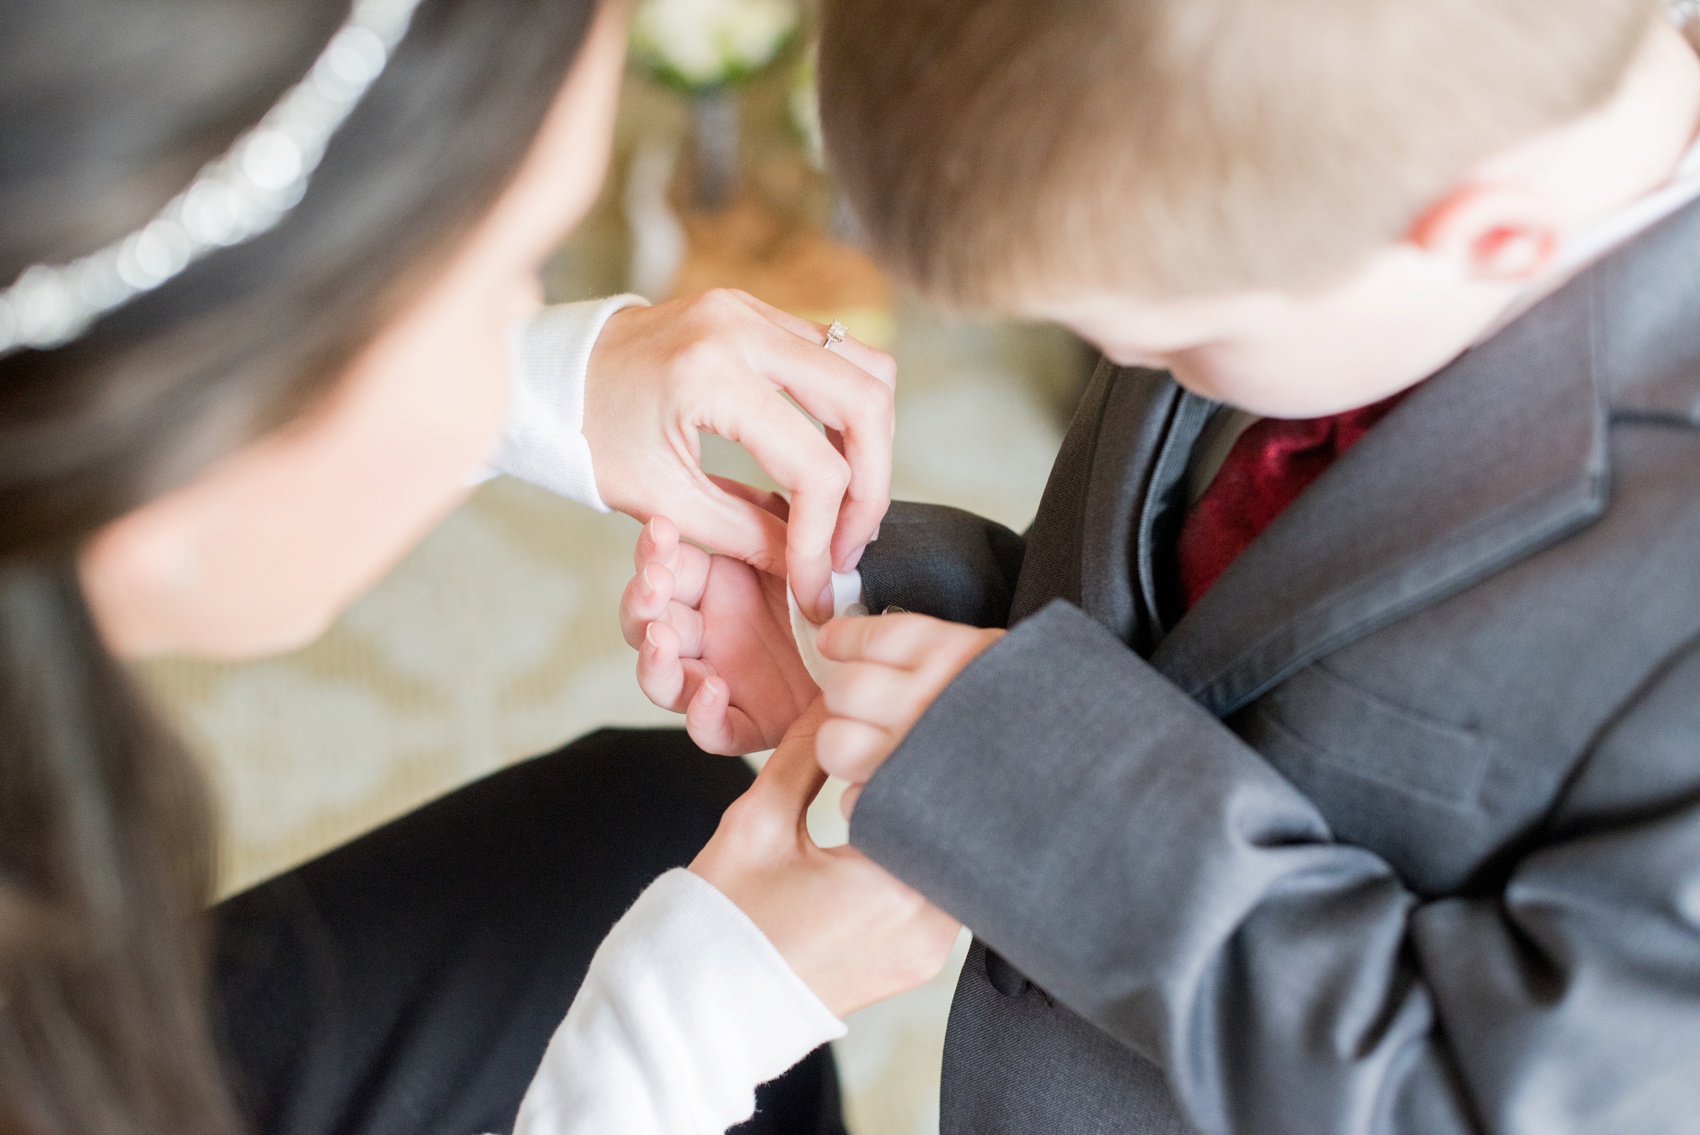 Omni Bedford Springs Resort wedding photos by Mikkel Paige Photography. The bride gets ready with a ring bearer.